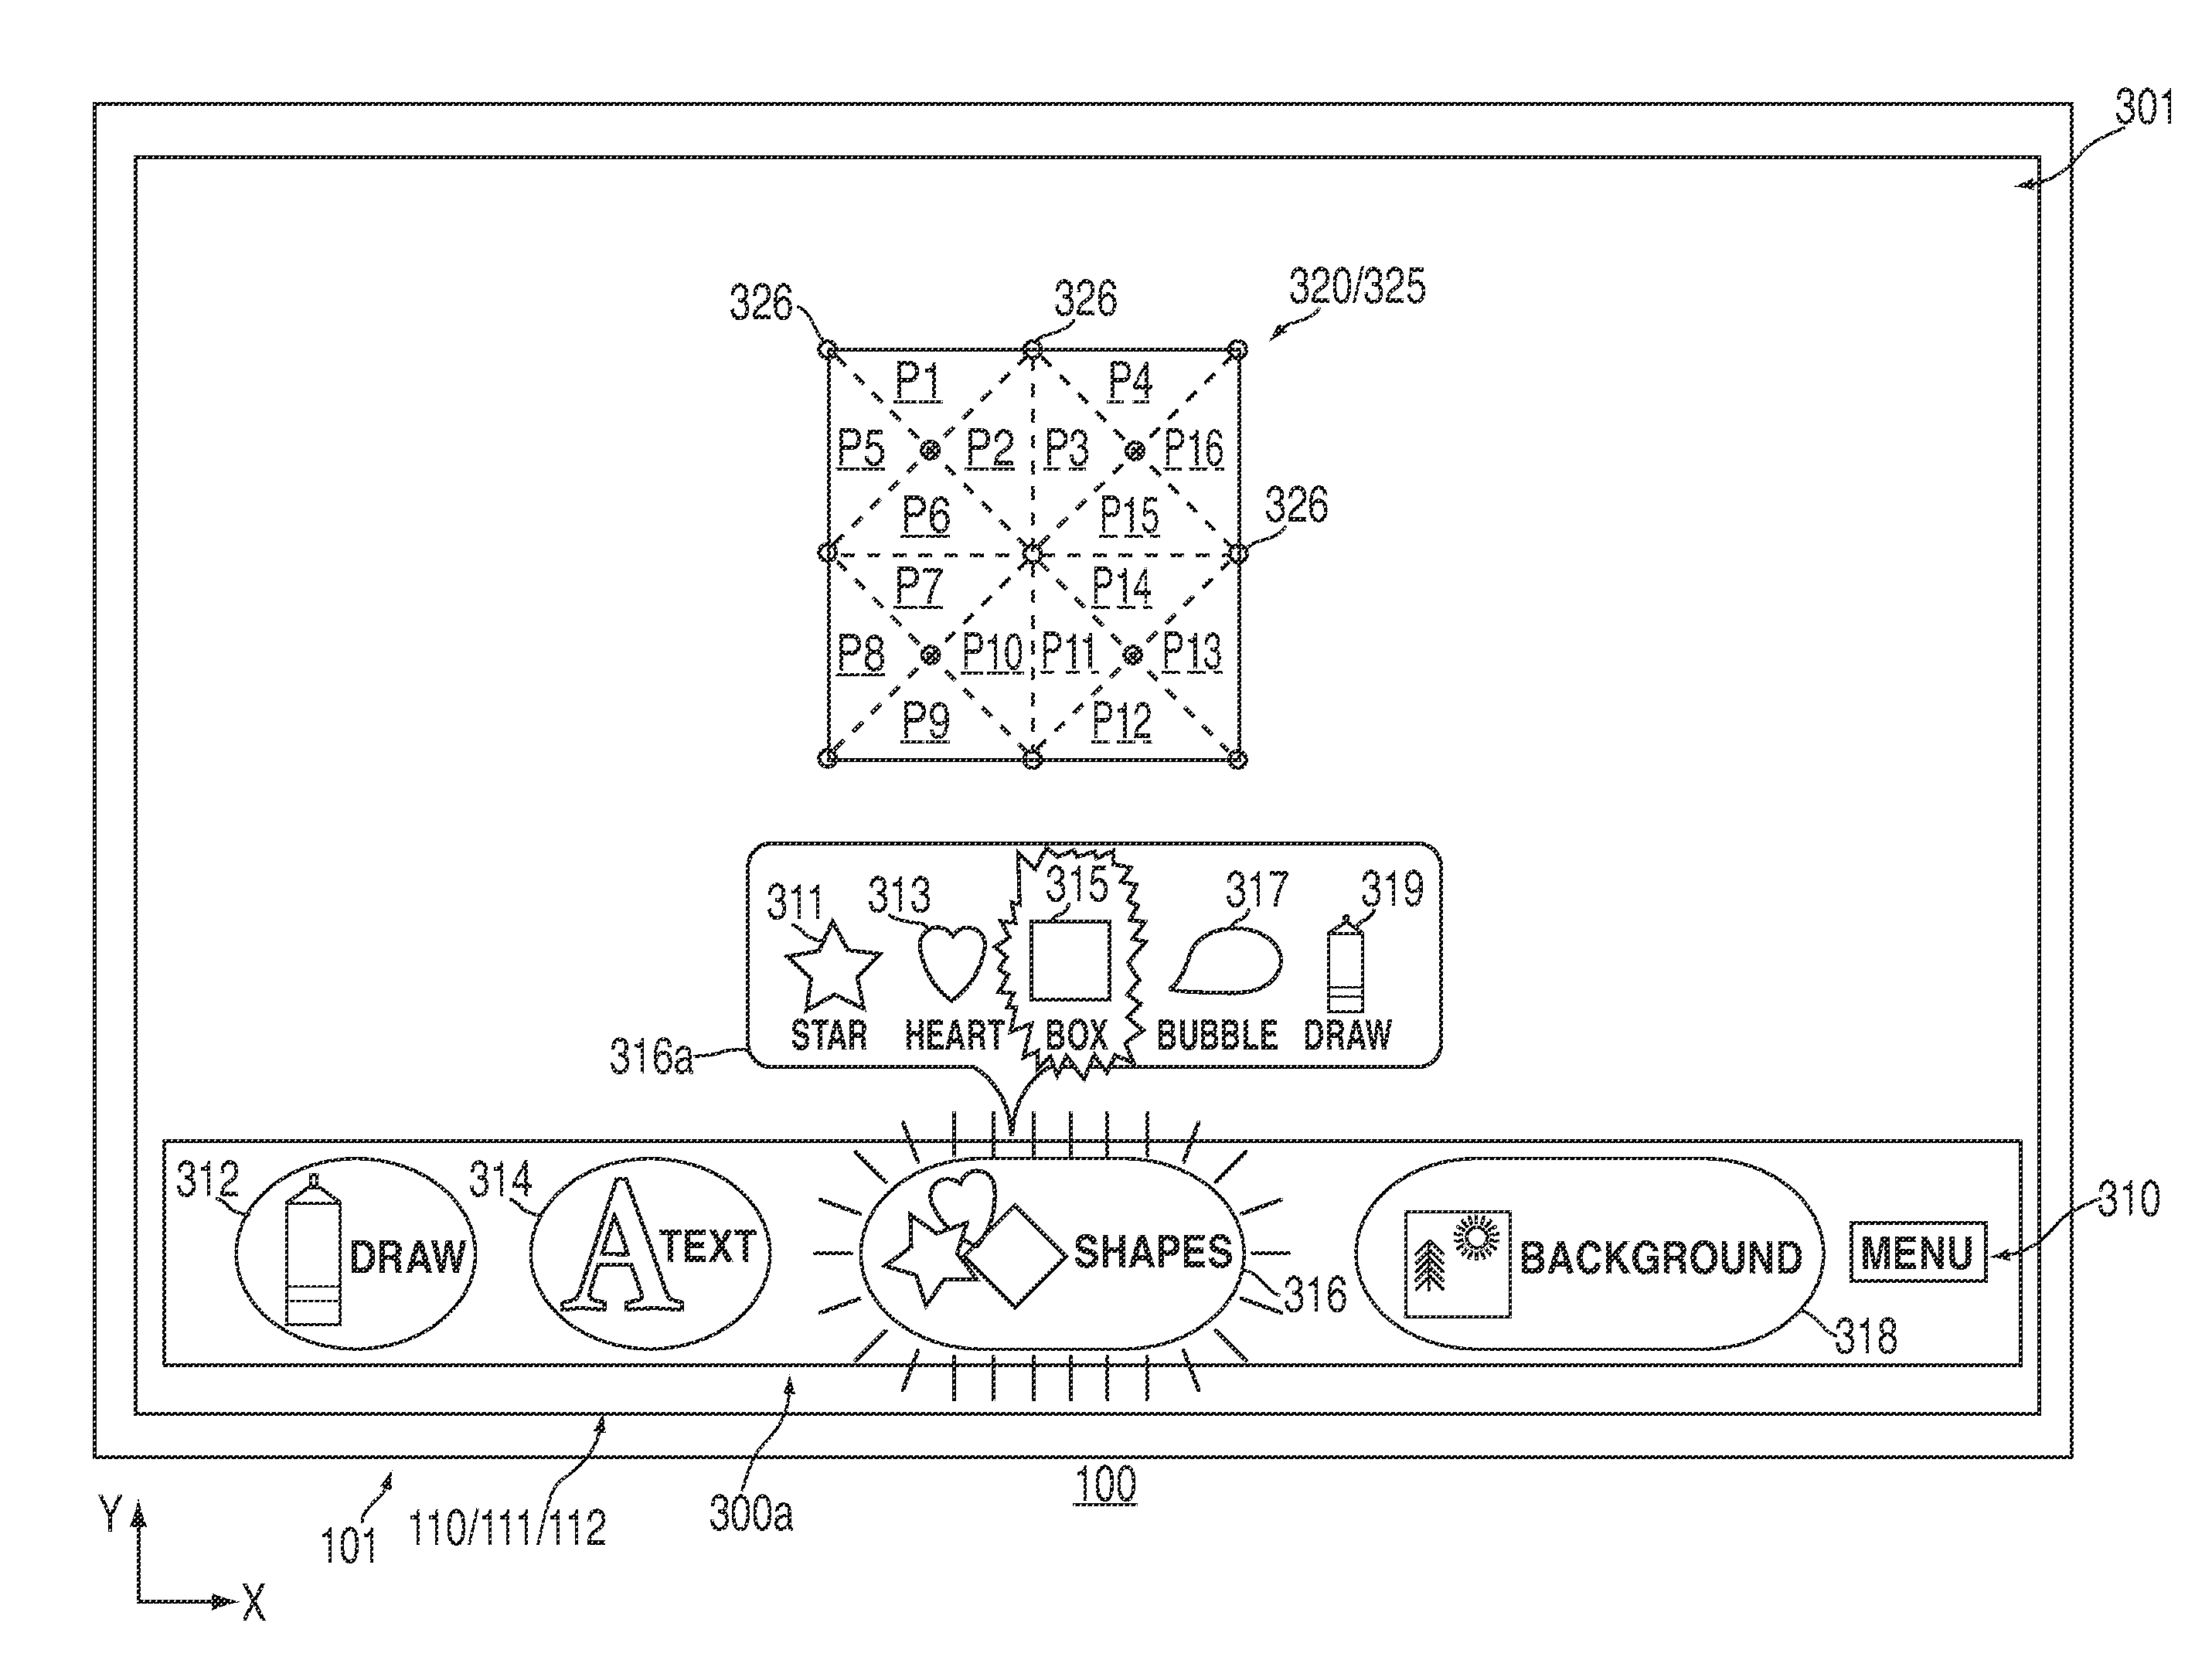 Systems, methods, and computer-readable media for manipulating graphical objects